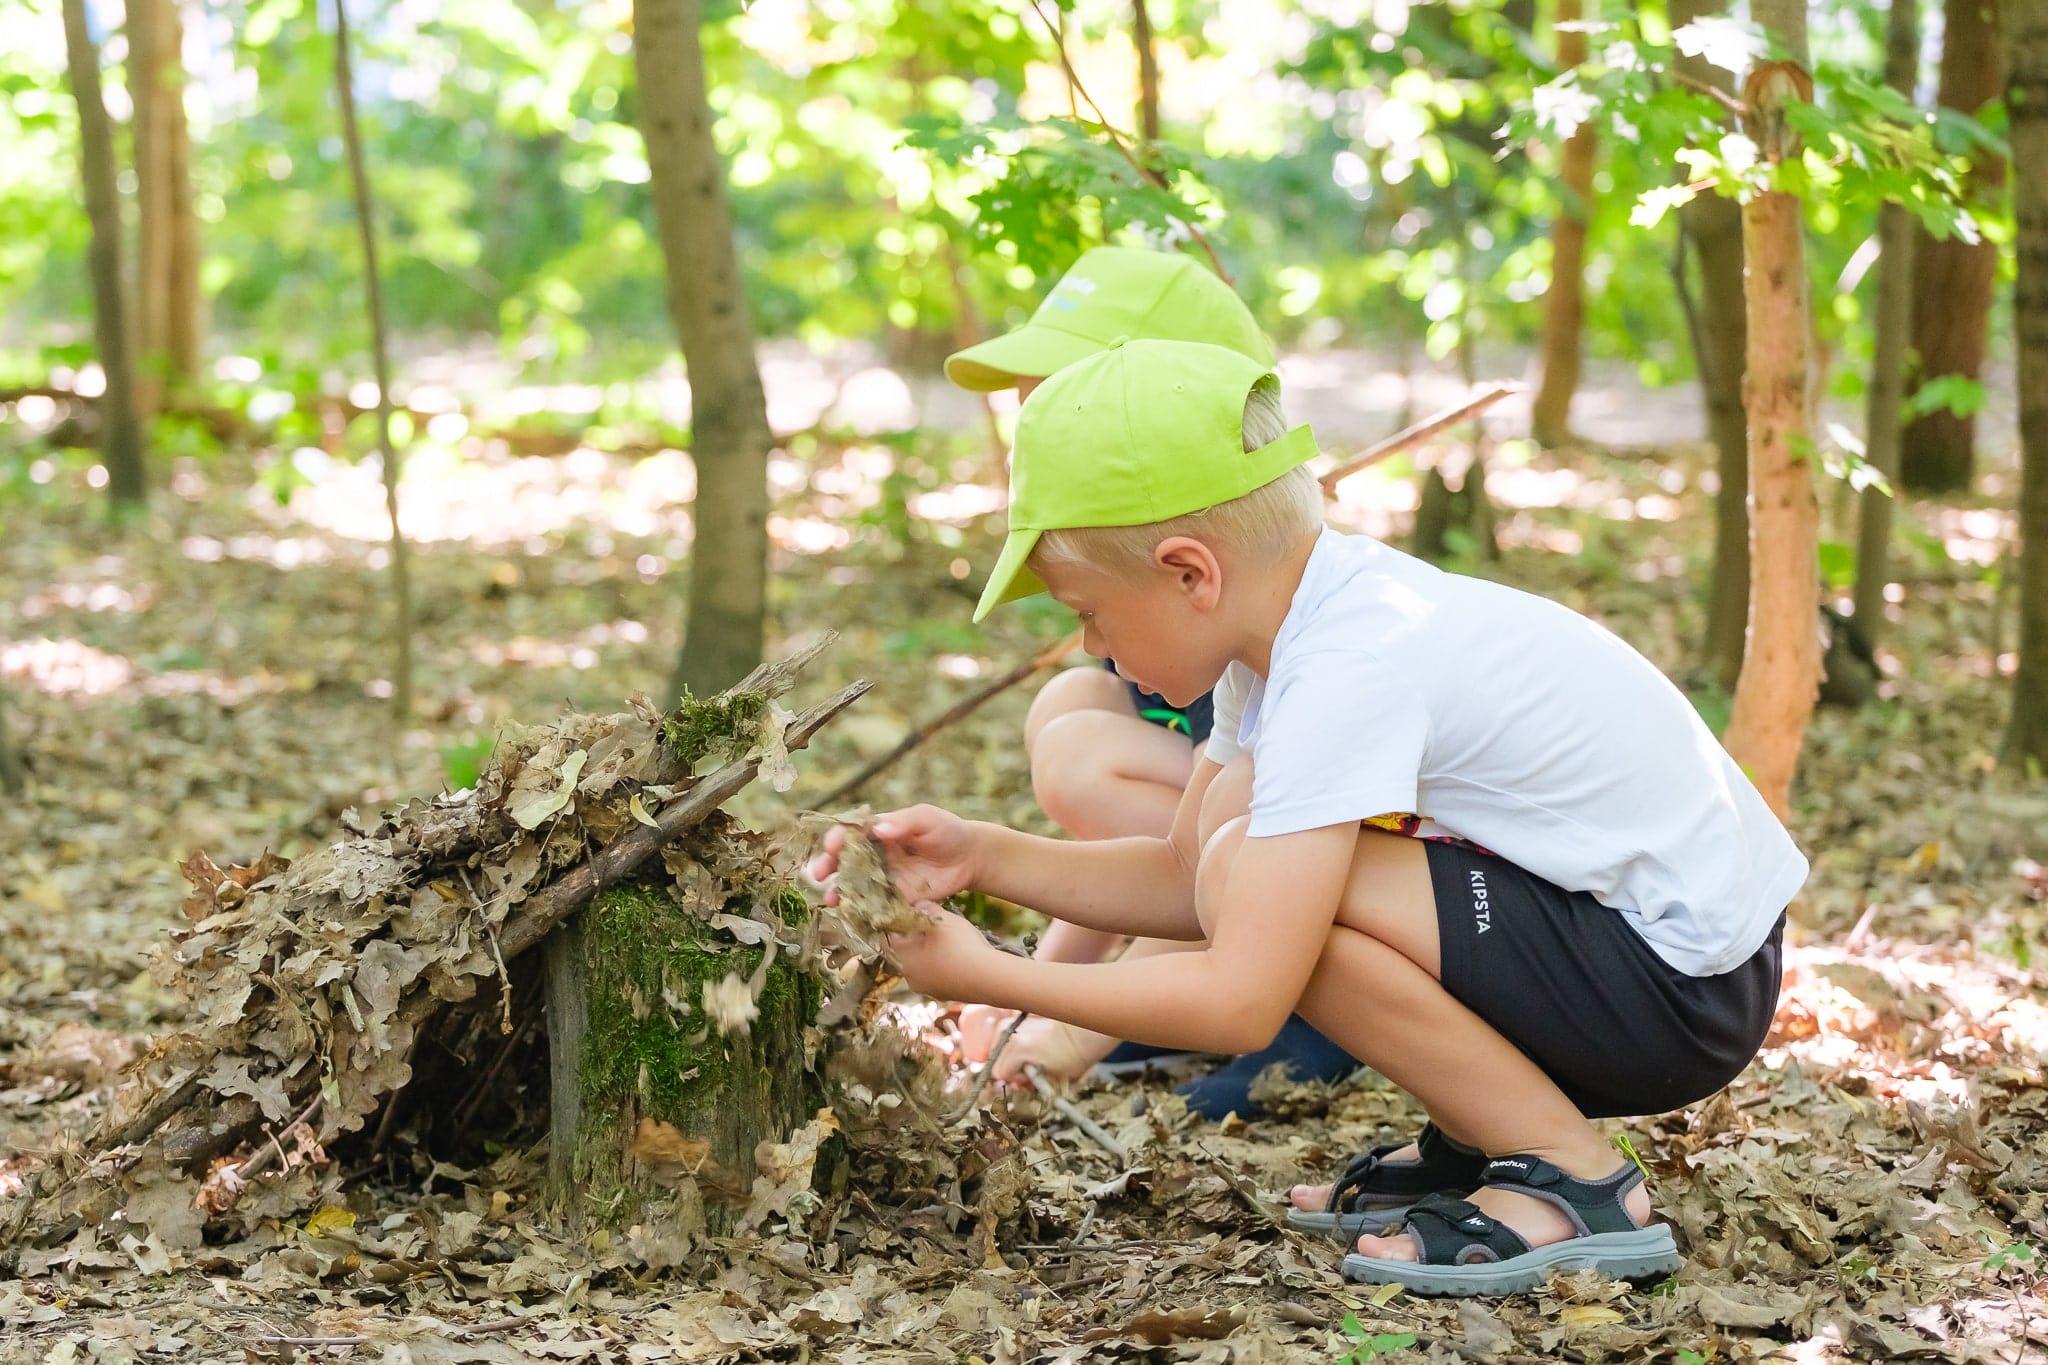 How Hands-on Learning Improves Students’ Potential | Prague British International School-How Hands-On Learning Improves Potential of Students-Forest School